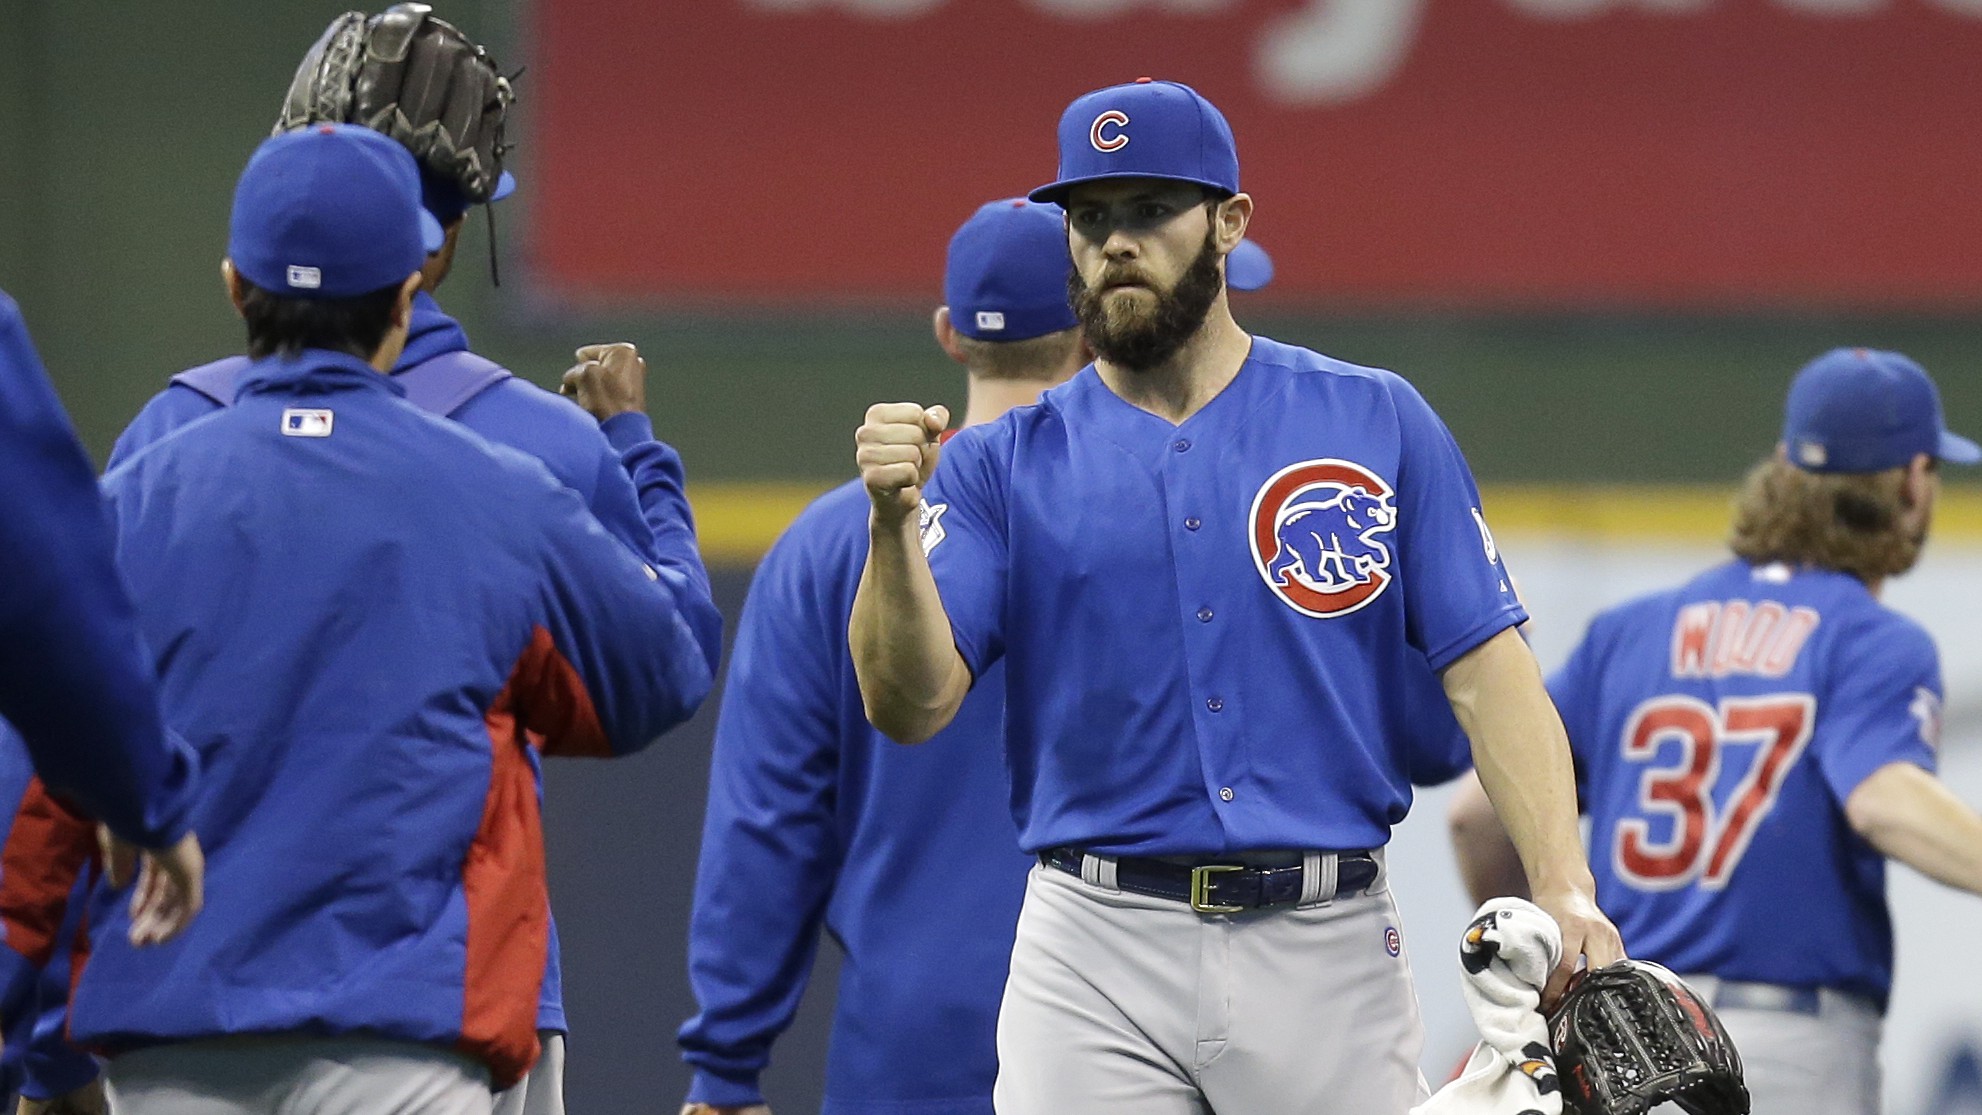 How to Watch Cubs vs. Pirates Live Stream Online